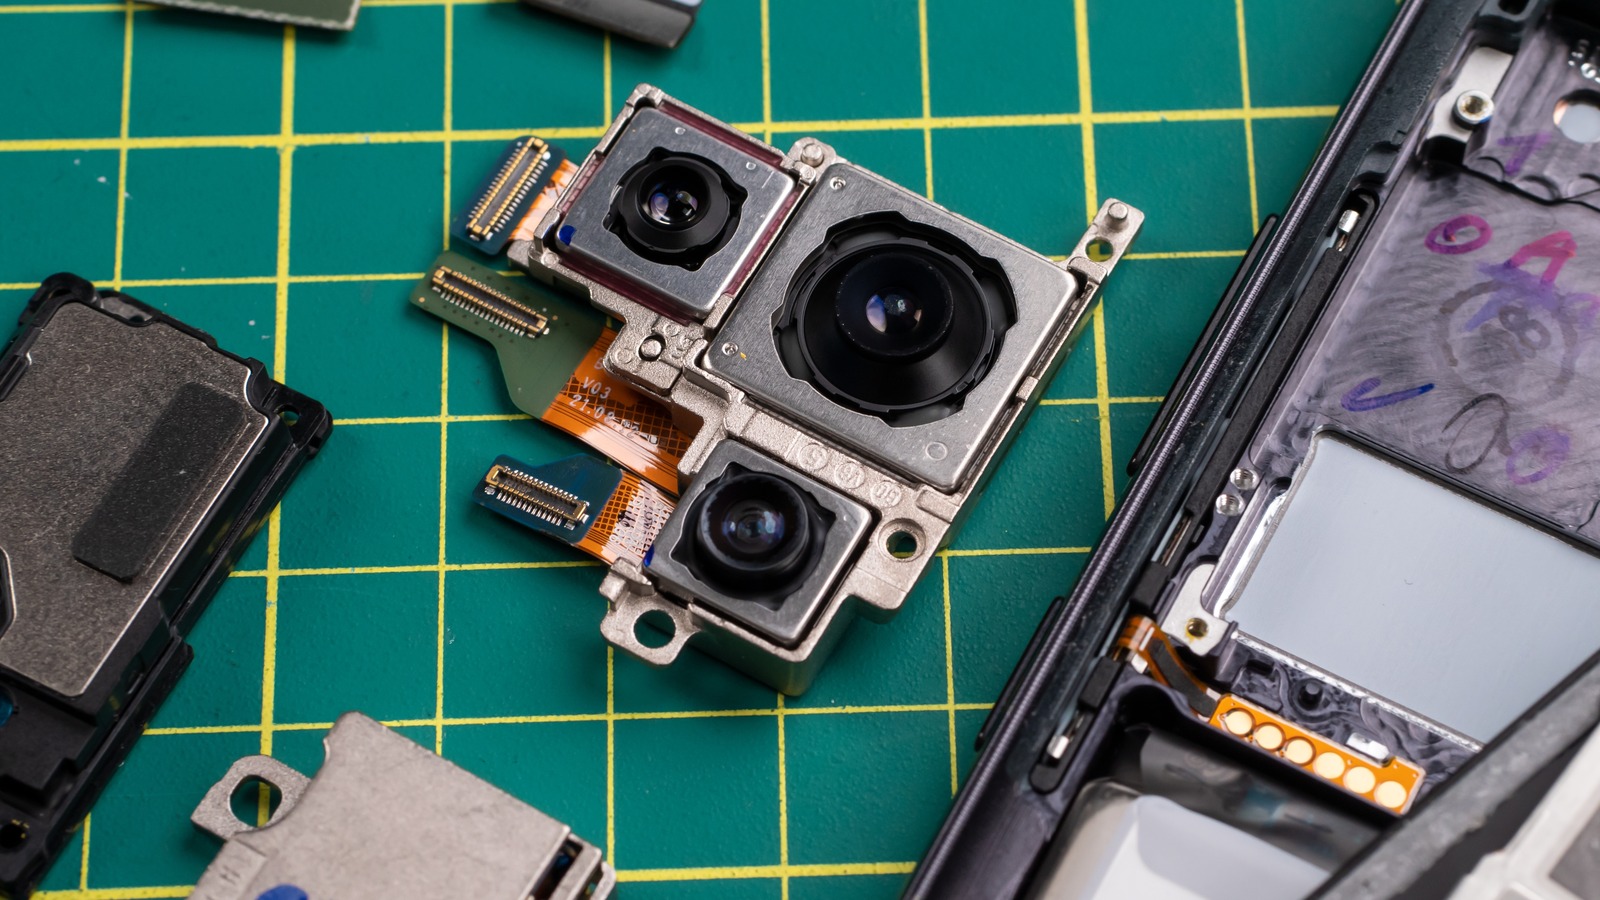 iFixit is ending its partnership with Samsung